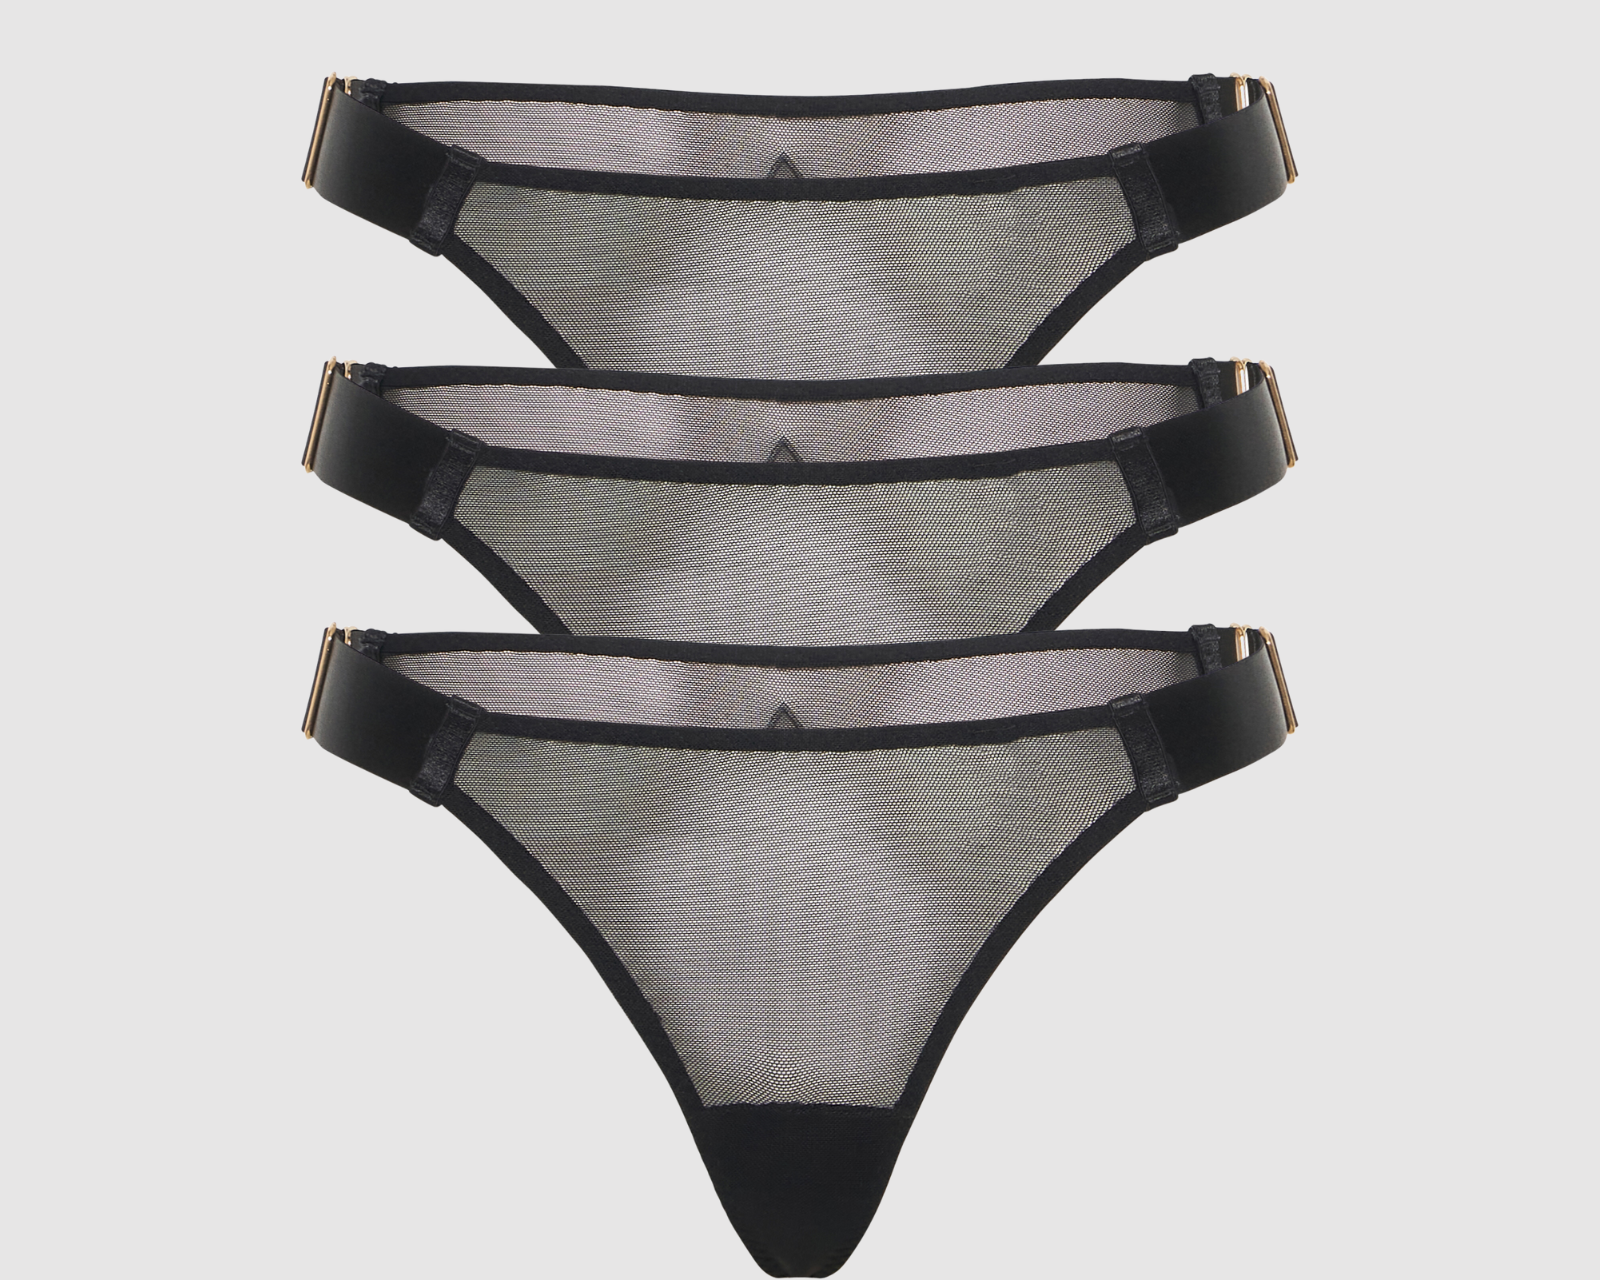 Mesh Lingerie By Sotto Brand, Opulent Mesh Collection